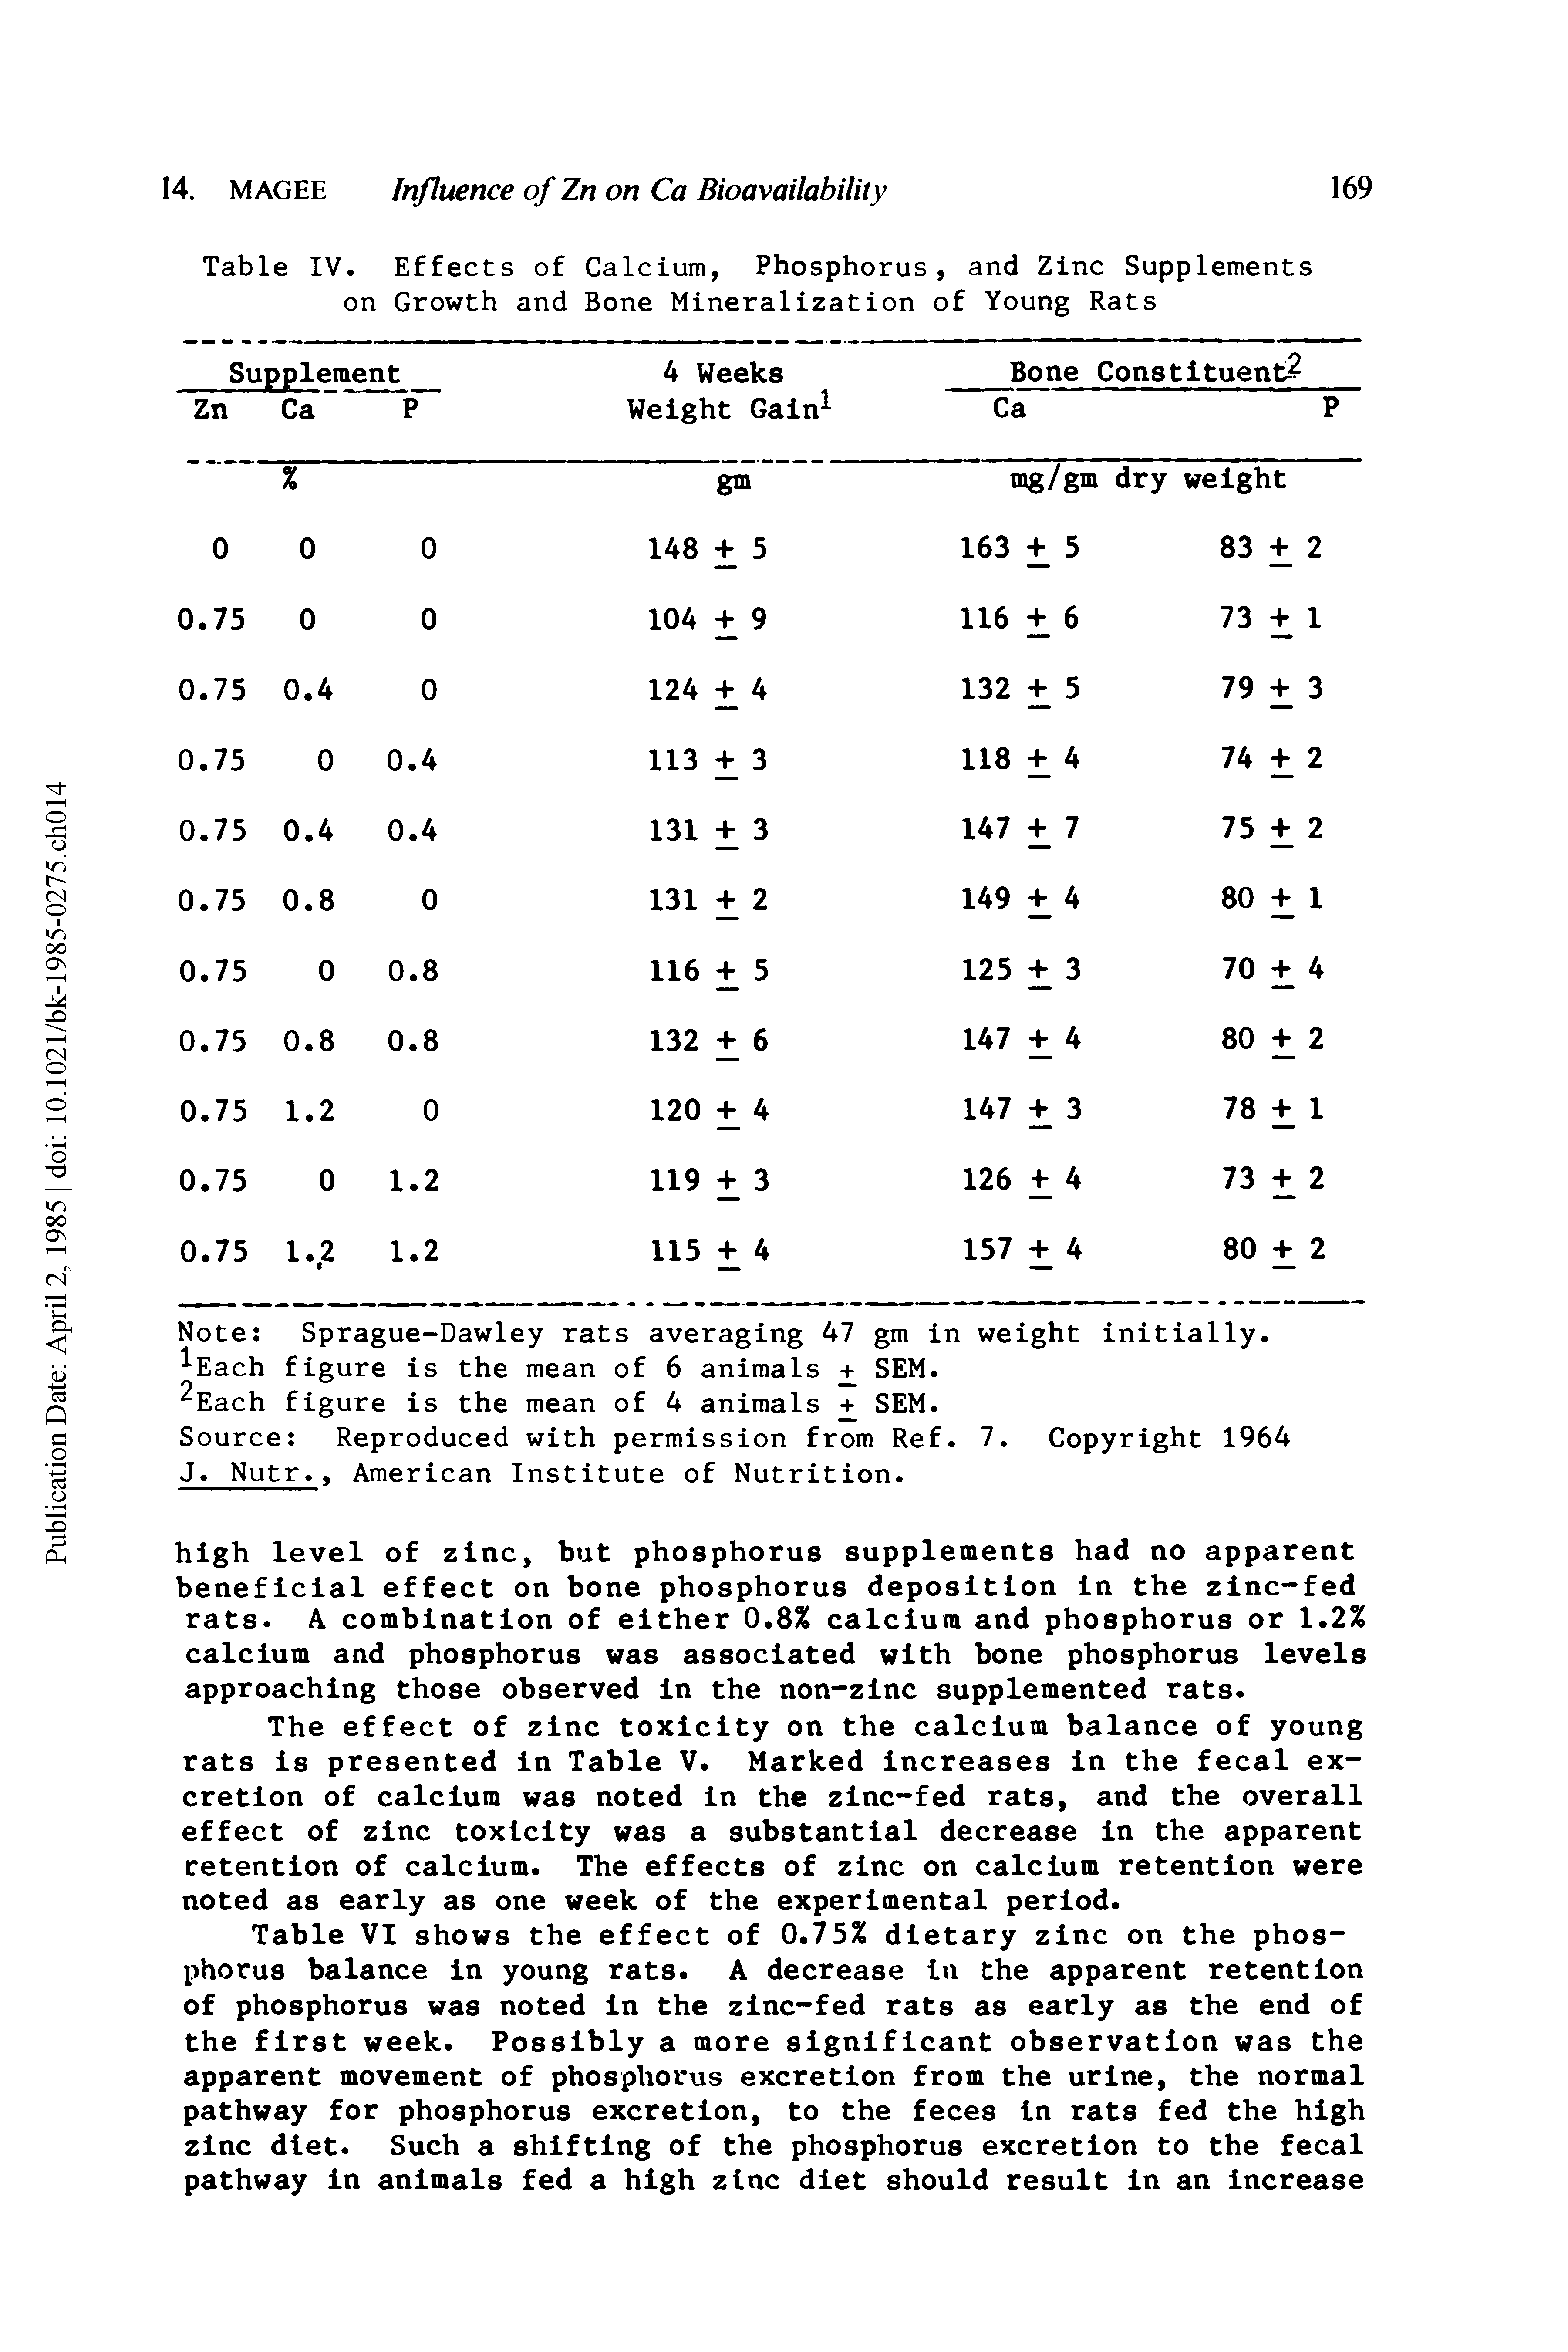 Table VI shows the effect of 0.75% dietary zinc on the phosphorus balance in young rats. A decrease in the apparent retention of phosphorus was noted in the zinc-fed rats as early as the end of the first week. Possibly a more significant observation was the apparent movement of phosphorus excretion from the urine, the normal pathway for phosphorus excretion, to the feces in rats fed the high zinc diet. Such a shifting of the phosphorus excretion to the fecal pathway in animals fed a high zinc diet should result in an increase...